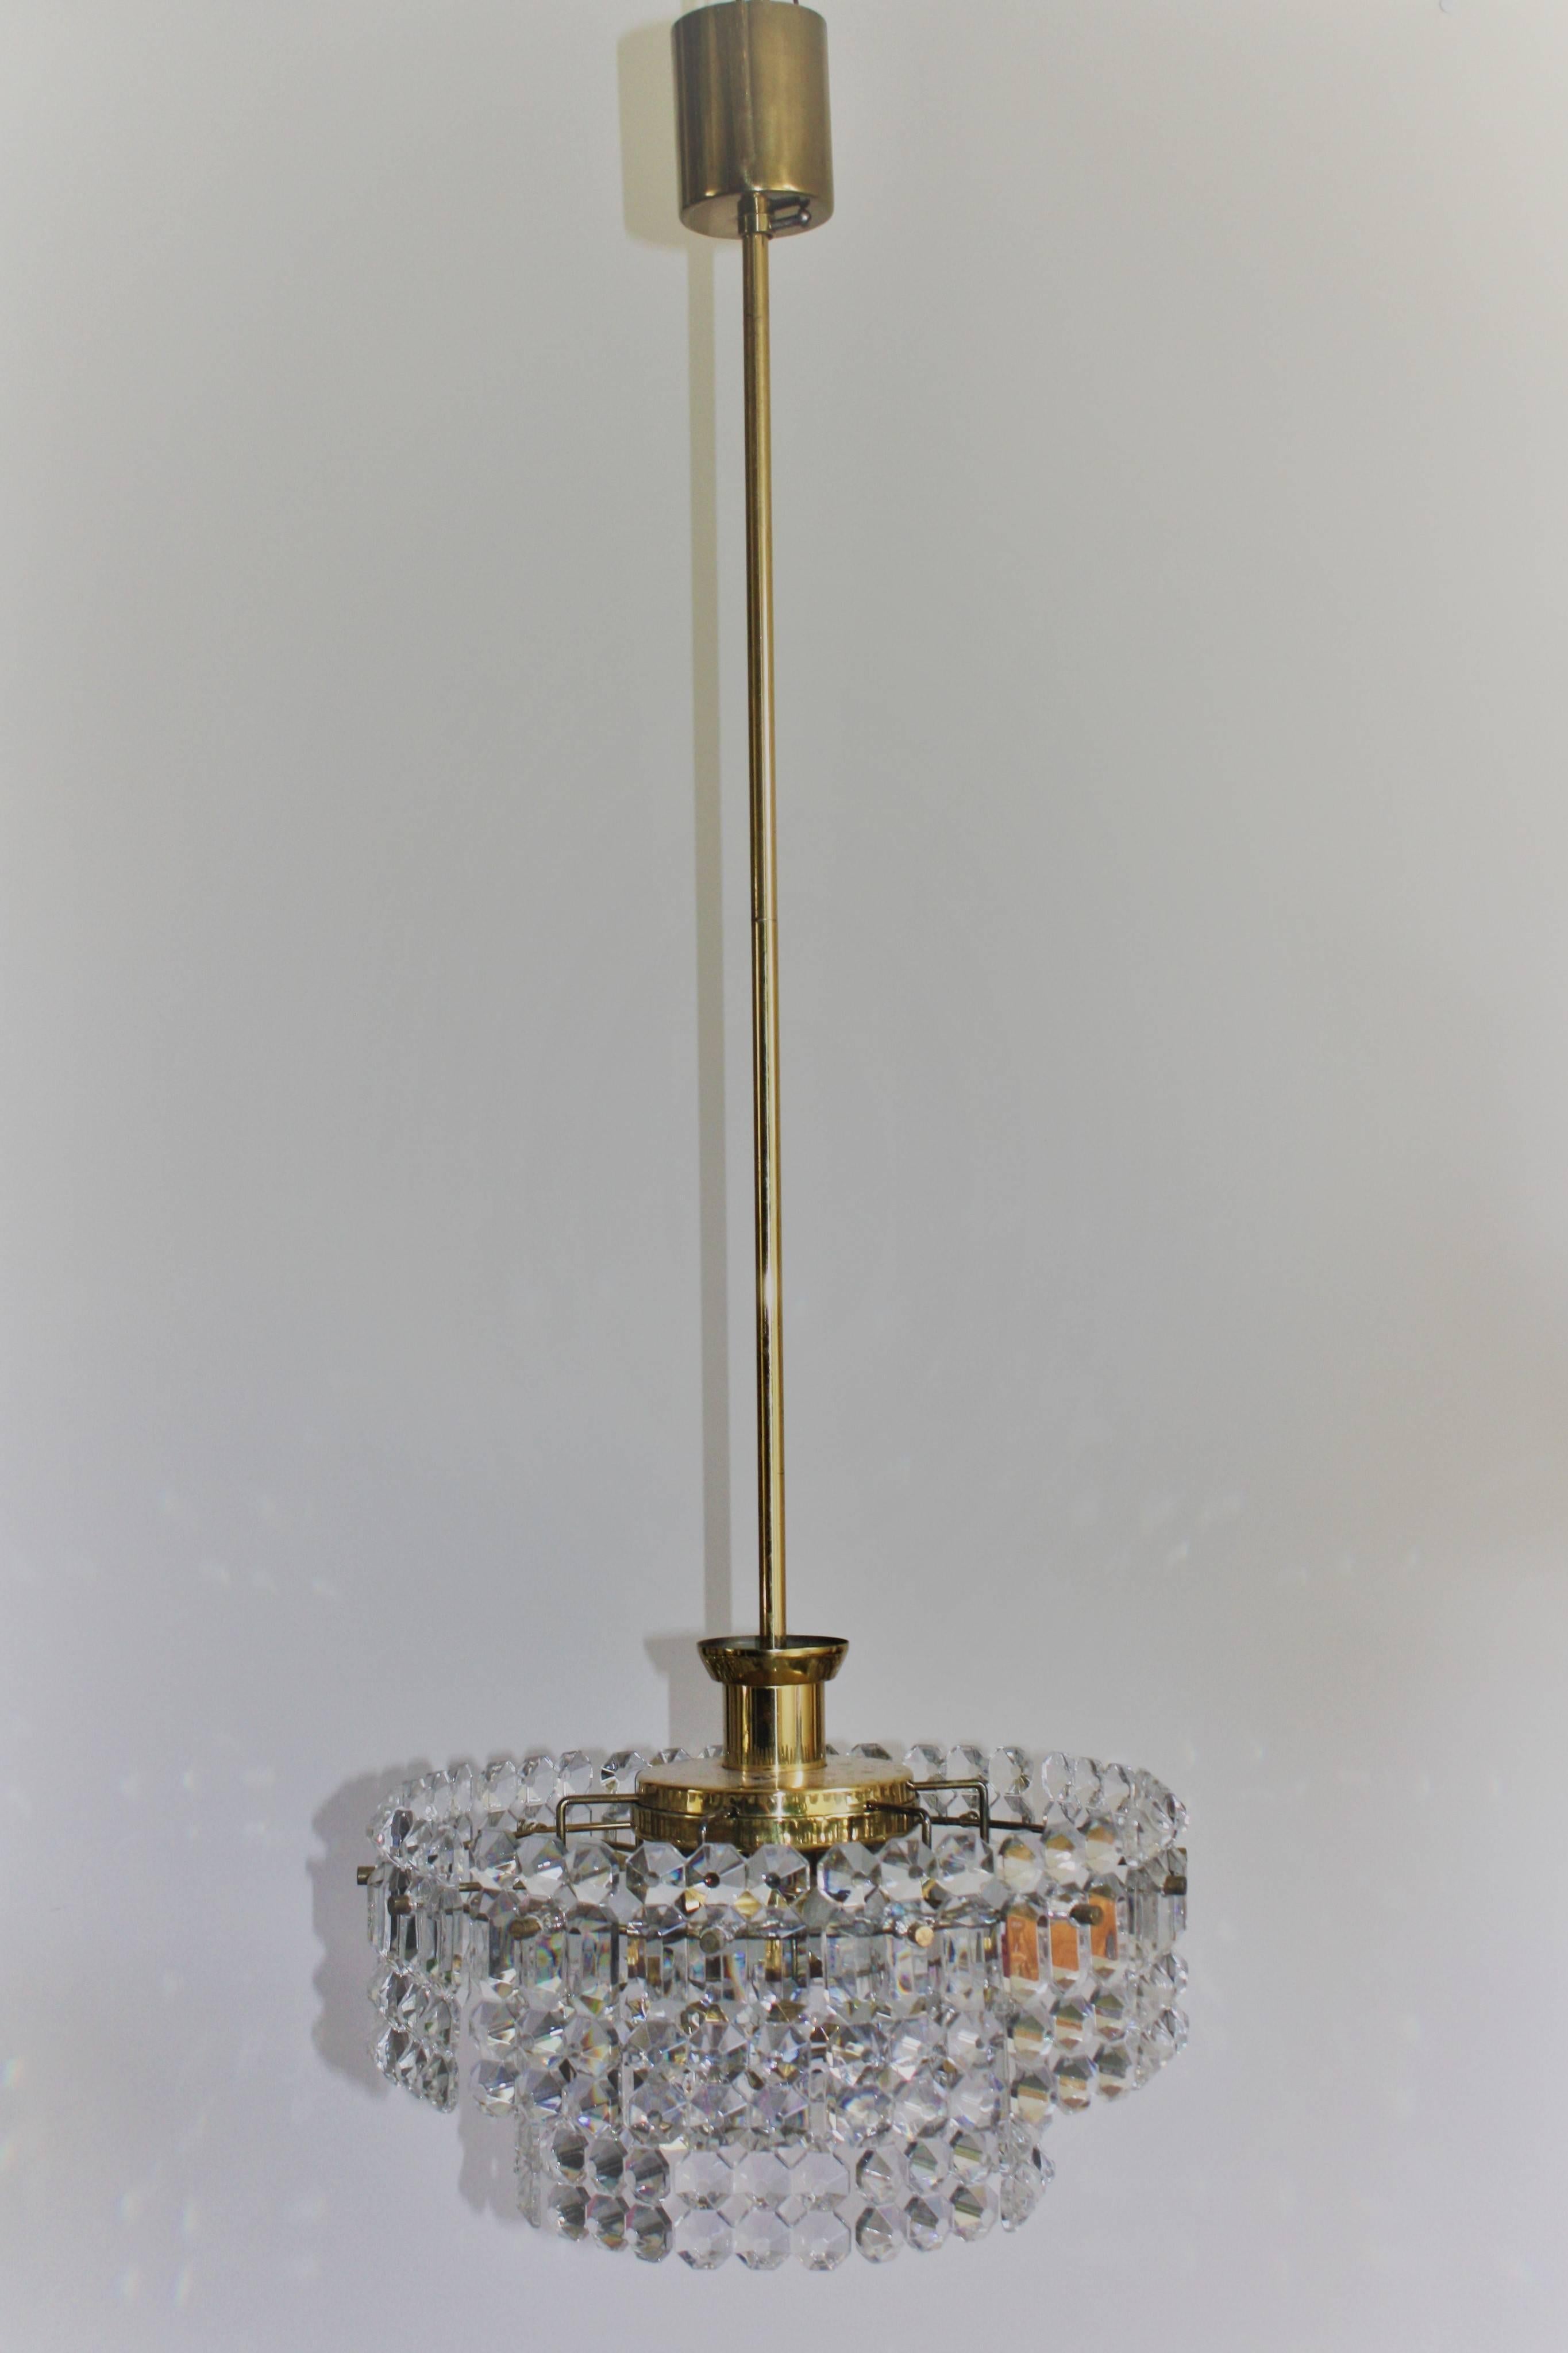 Elegant high quality seven-light crystal chandelier by Kinkeldey, Germany, circa 1960s.
Two-tier chandelier with geometric crystal on the polished brass frame. Height can be shorten in the middle of the chain.
Socket: 6 x E14 and 1 x E27  for